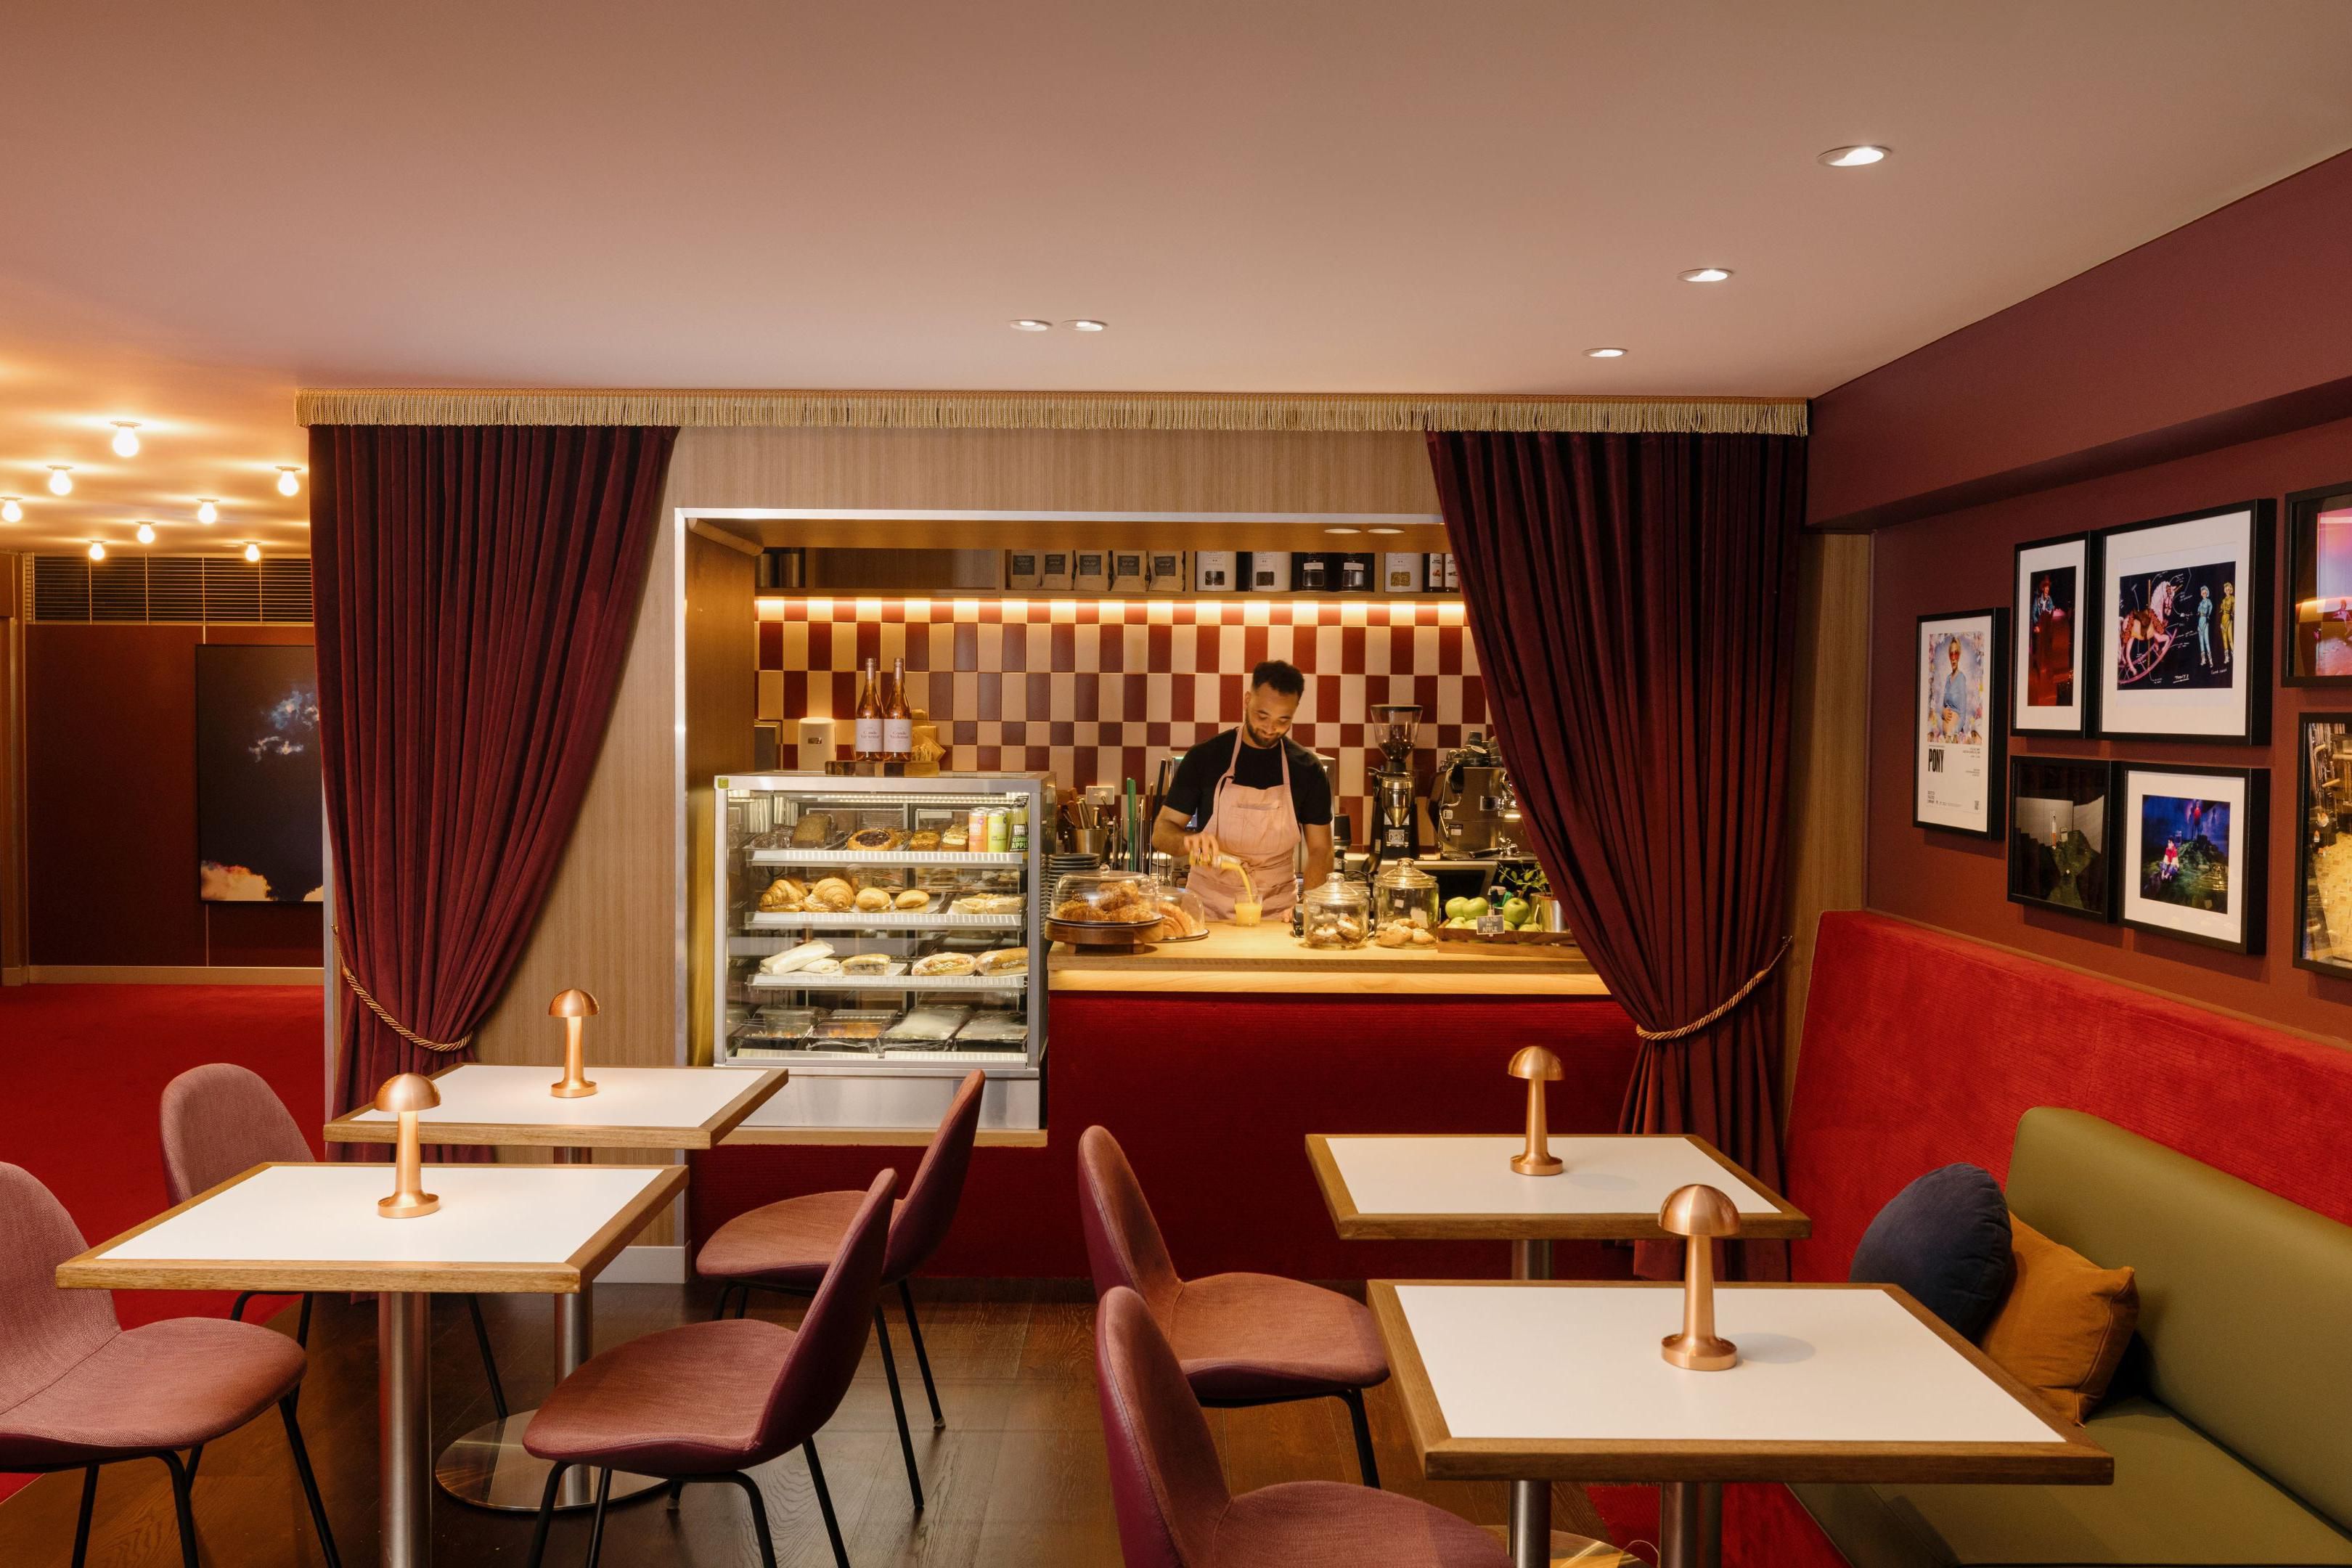 Delve into fresh espresso coffee and snack at 'The X', alongside our theatre-like lobby, lined with glamorous copper-coloured curtains and a series of portraits by Gary Heery.